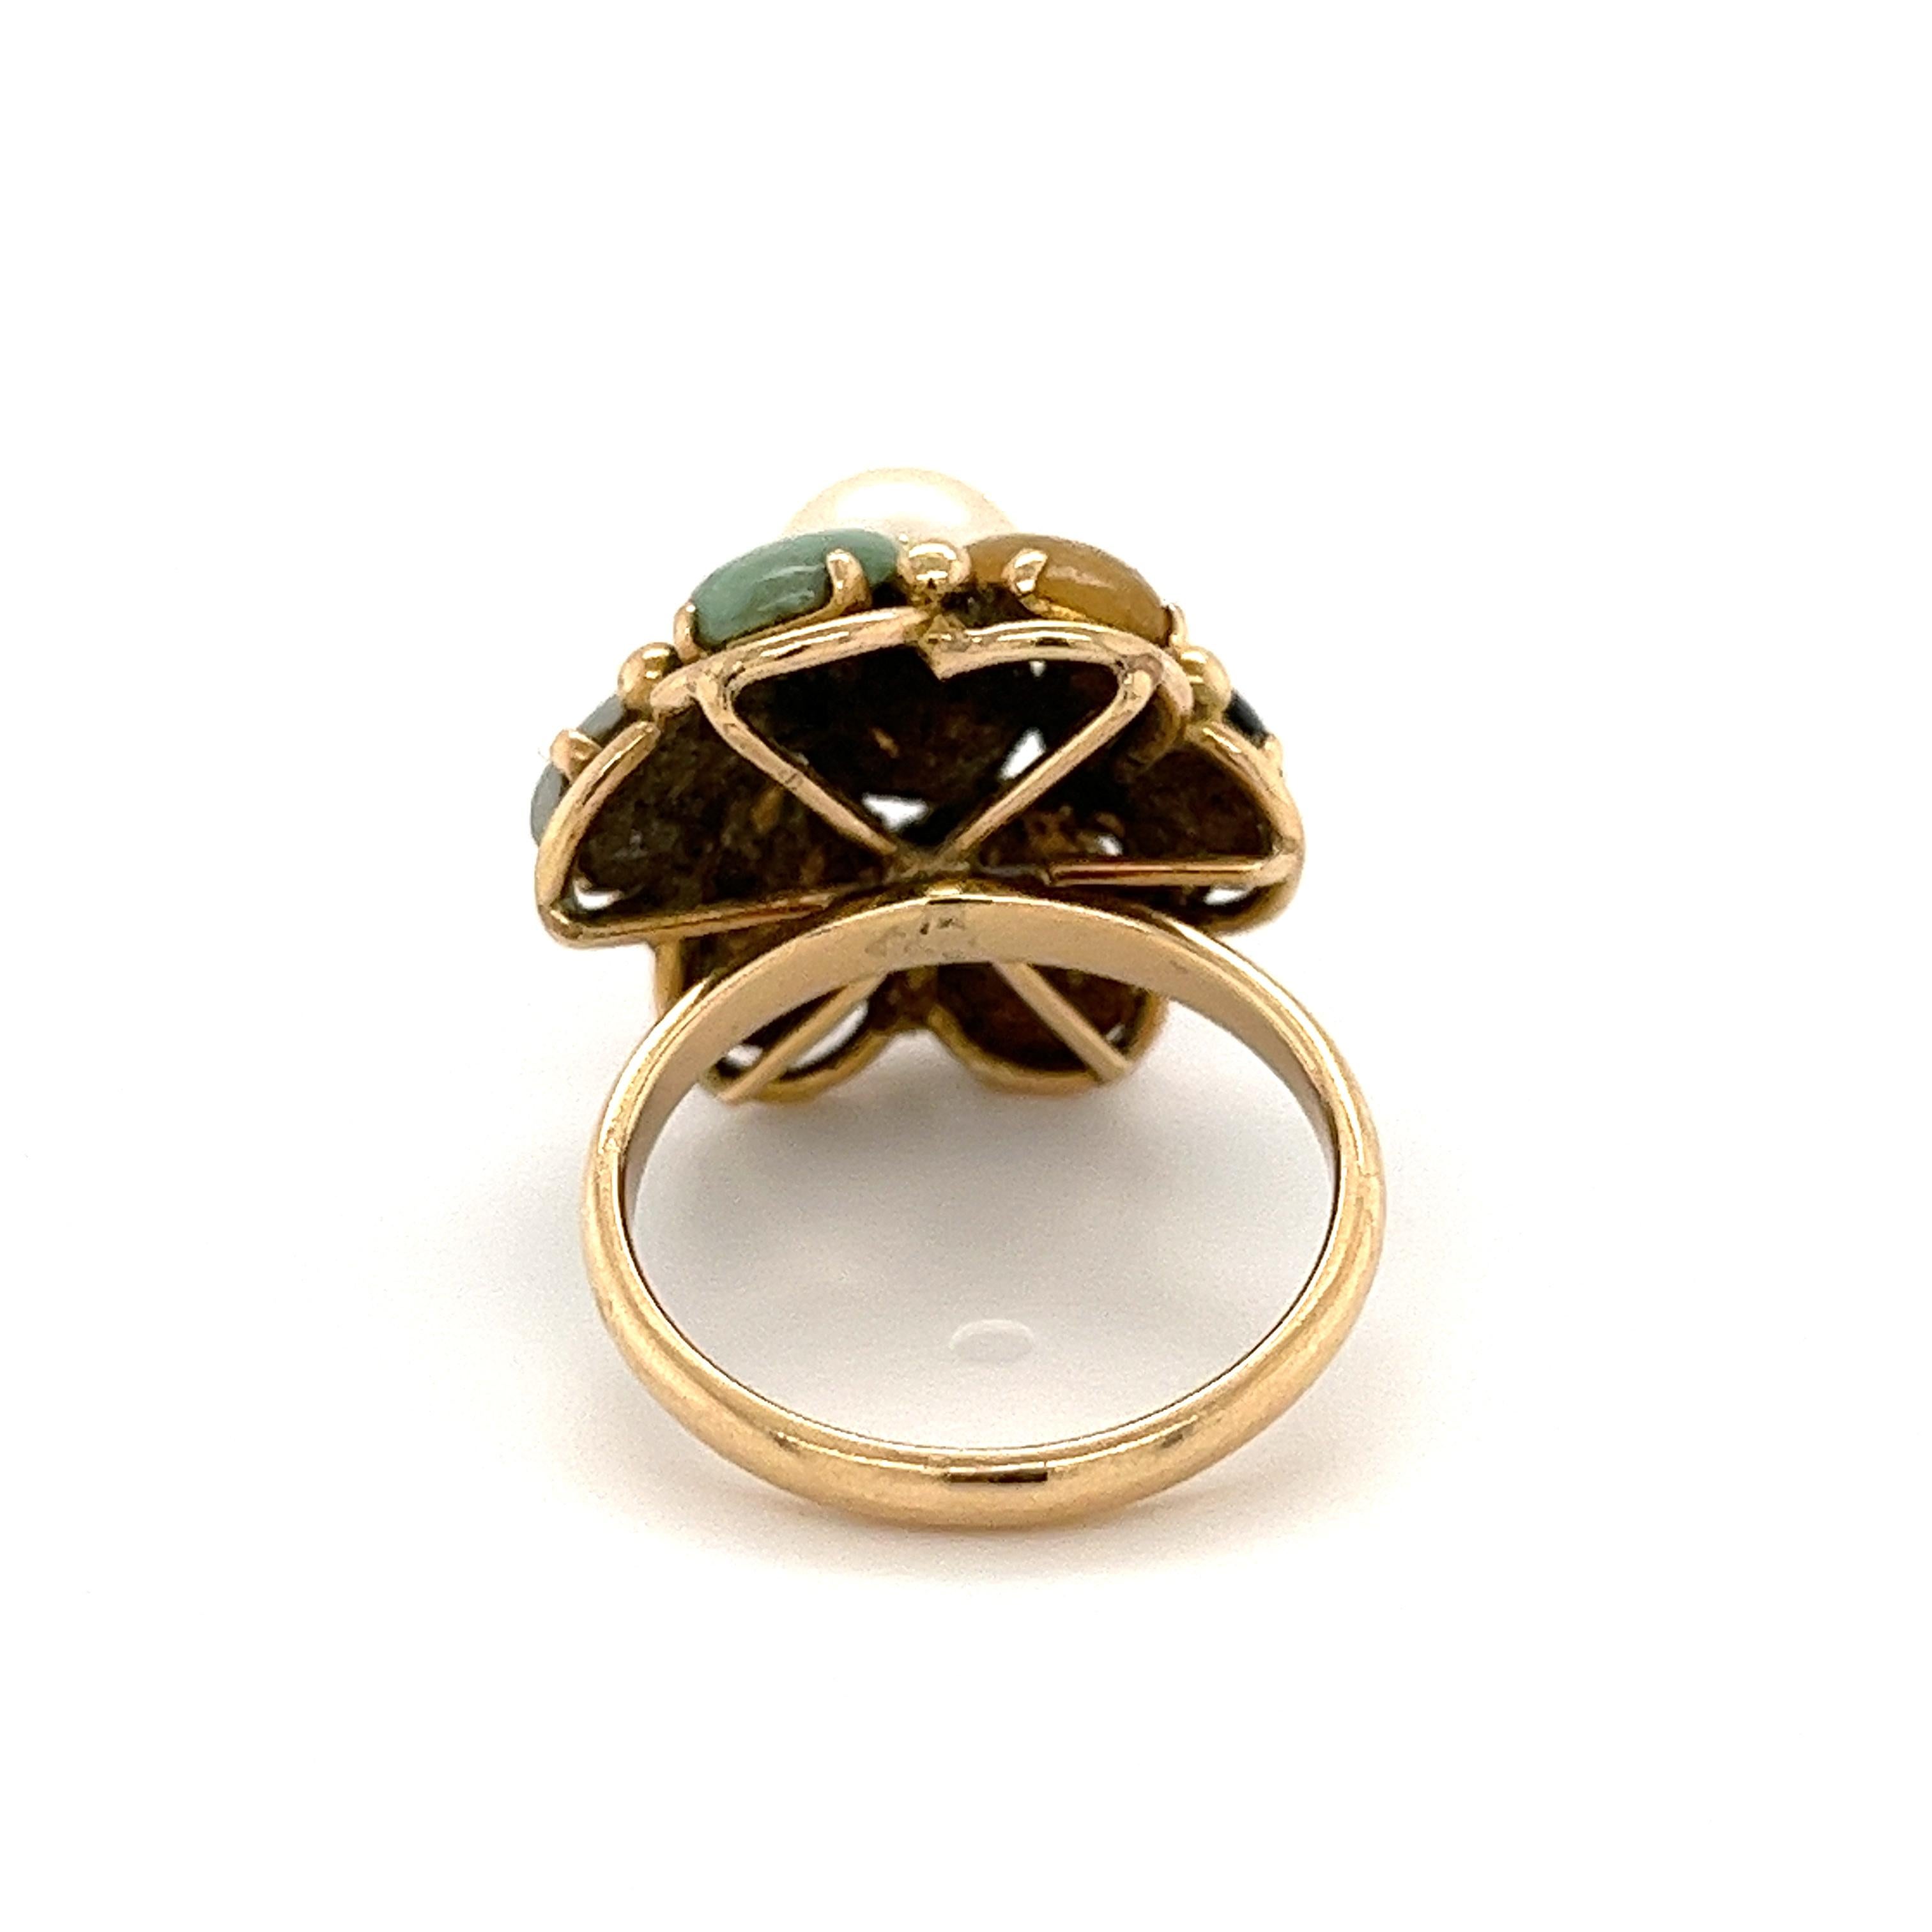 Women's or Men's Multi Gem Flower Cluster Ring with Cabochon Cut Stones in 14k Gold